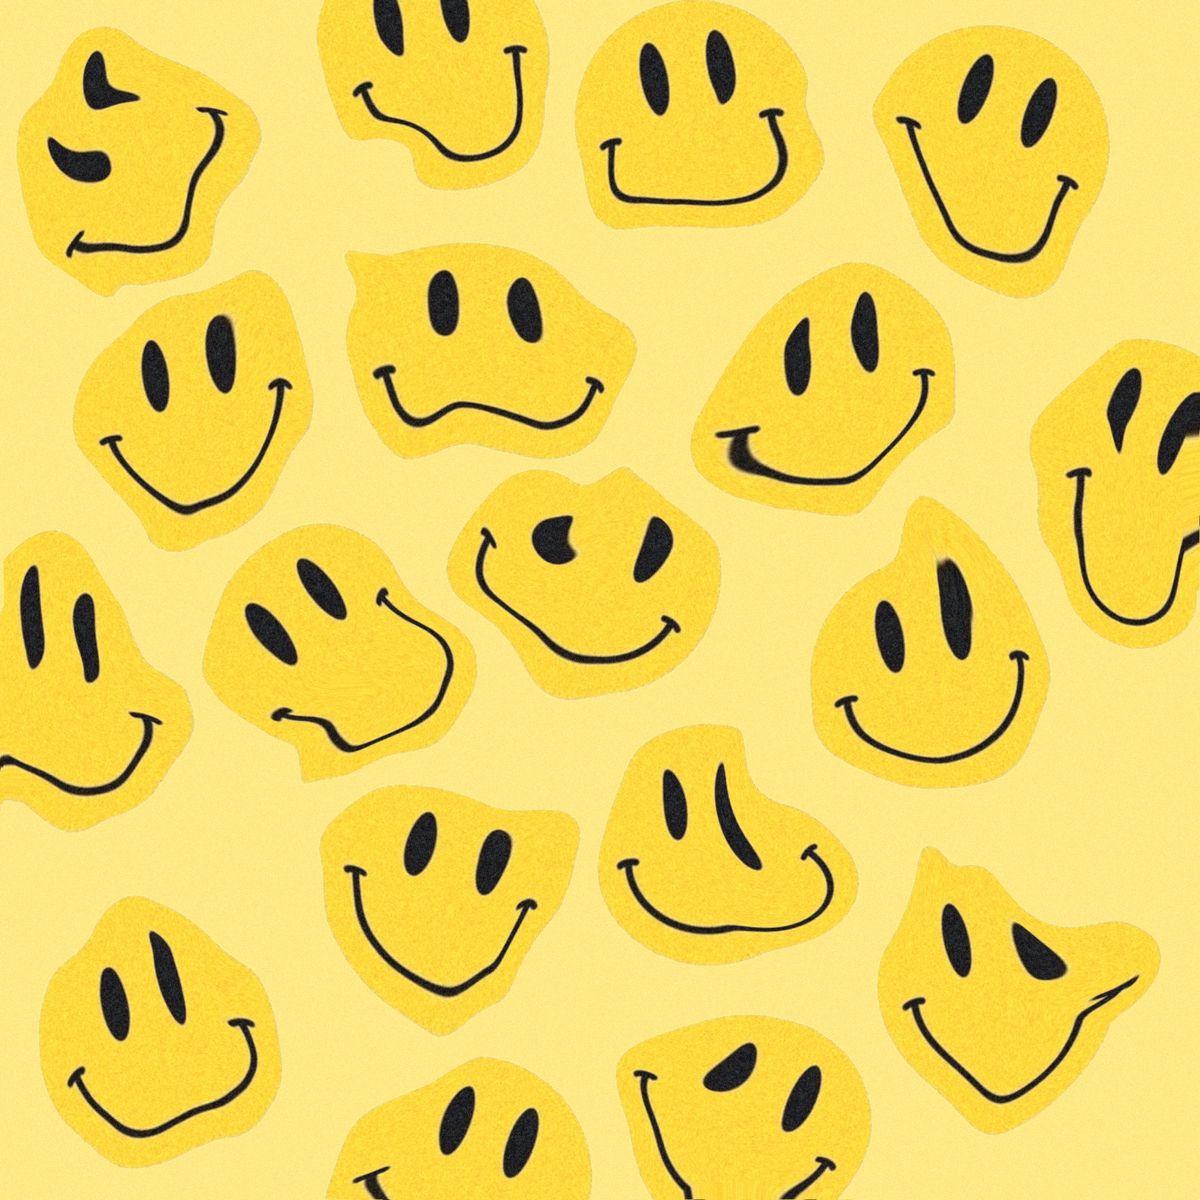 1200 x 1200 · jpeg - smiley face in 2021 | Preppy wallpaper, Indie art, Smily face